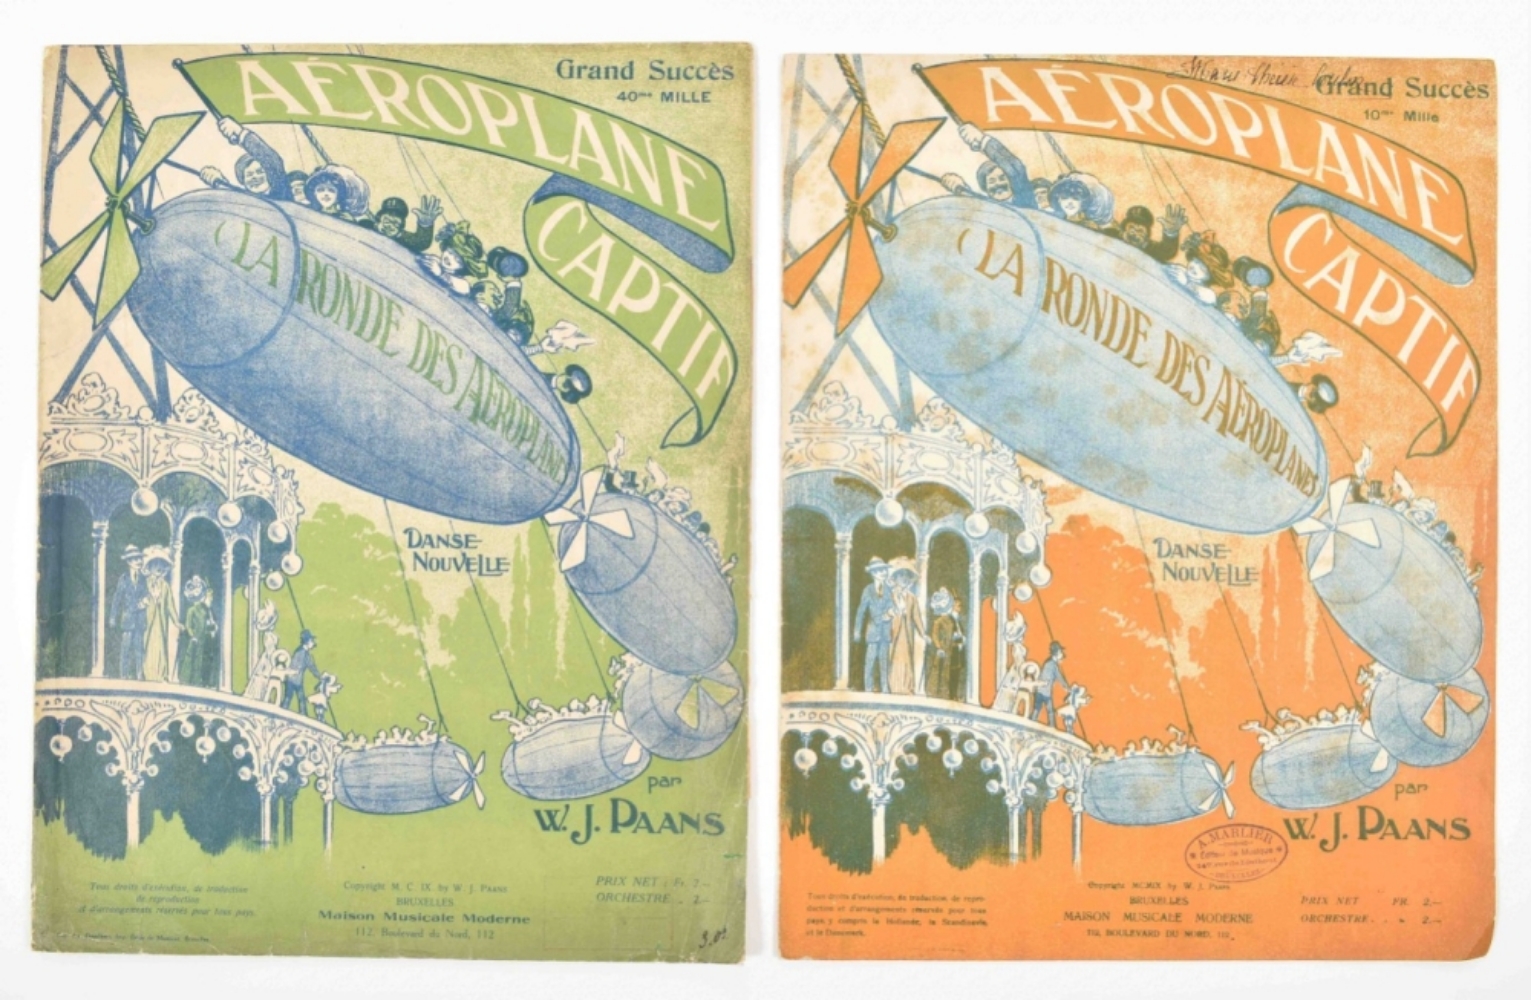 Collection of sheet music about airplanes, - Image 2 of 7